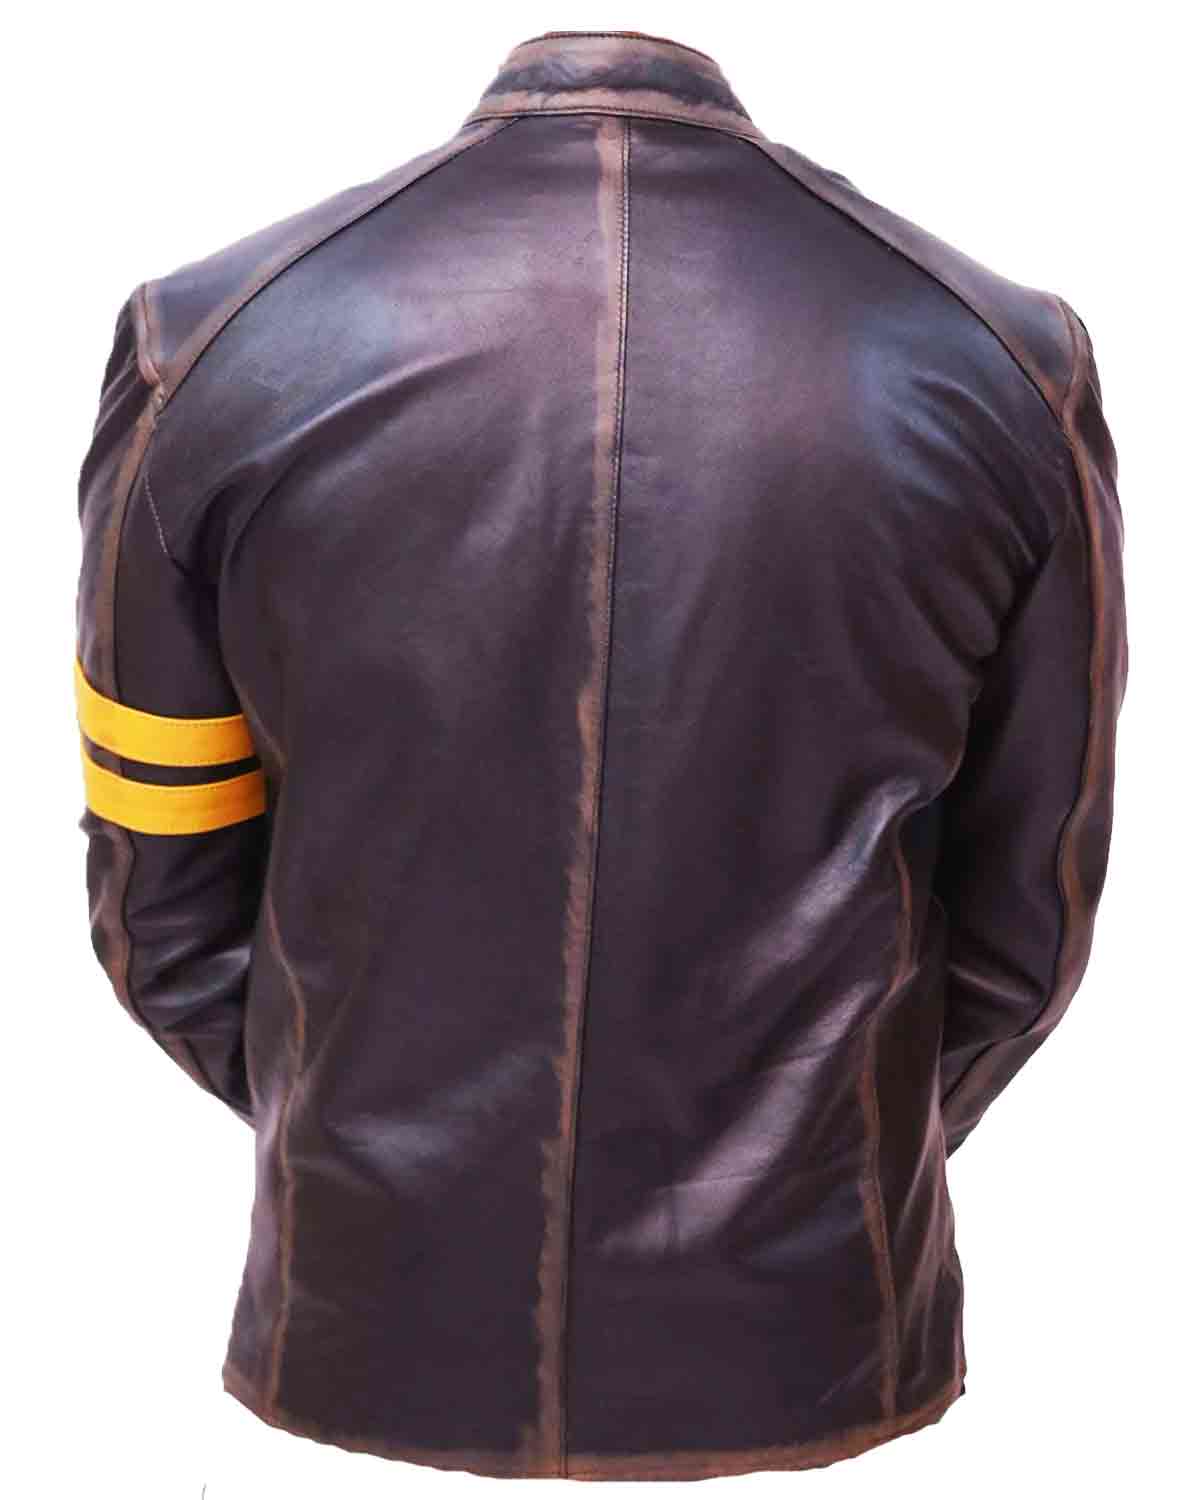 Elite Men's Black Cafe Racer Leather Jacket With Yellow Strip